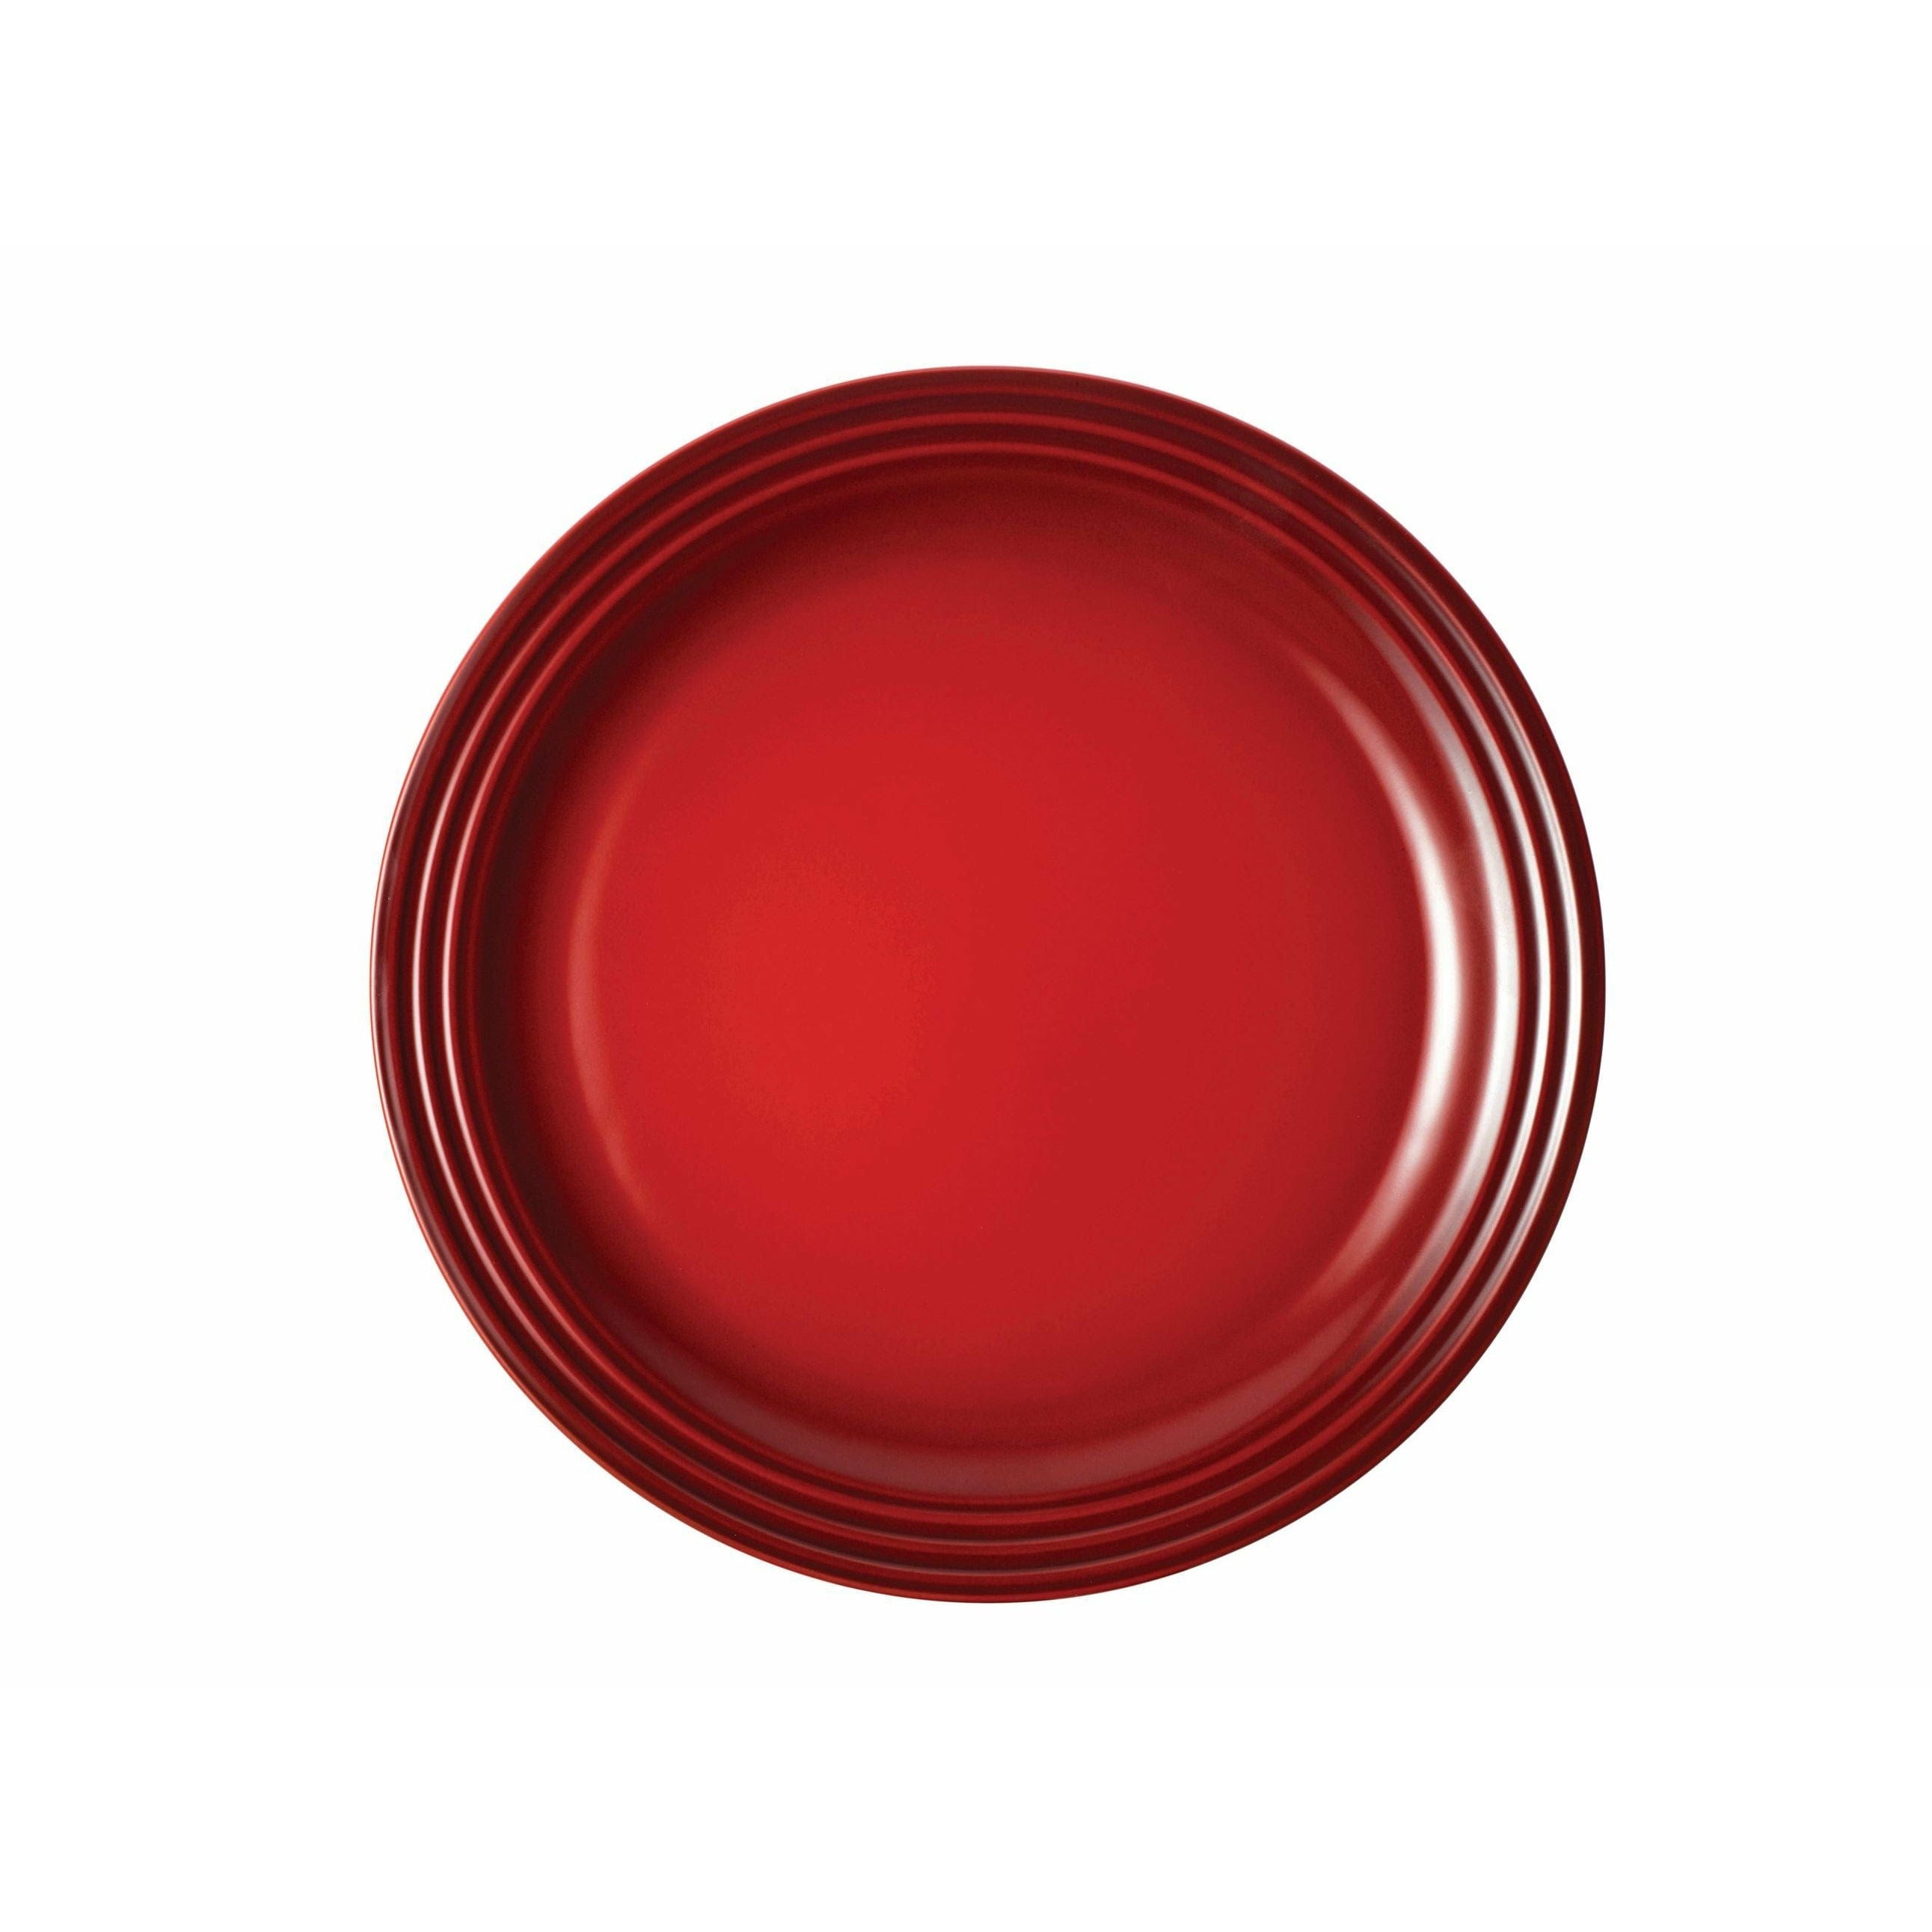 Le Creuset Signature Dinner Plate 27 Cm, Cherry Red